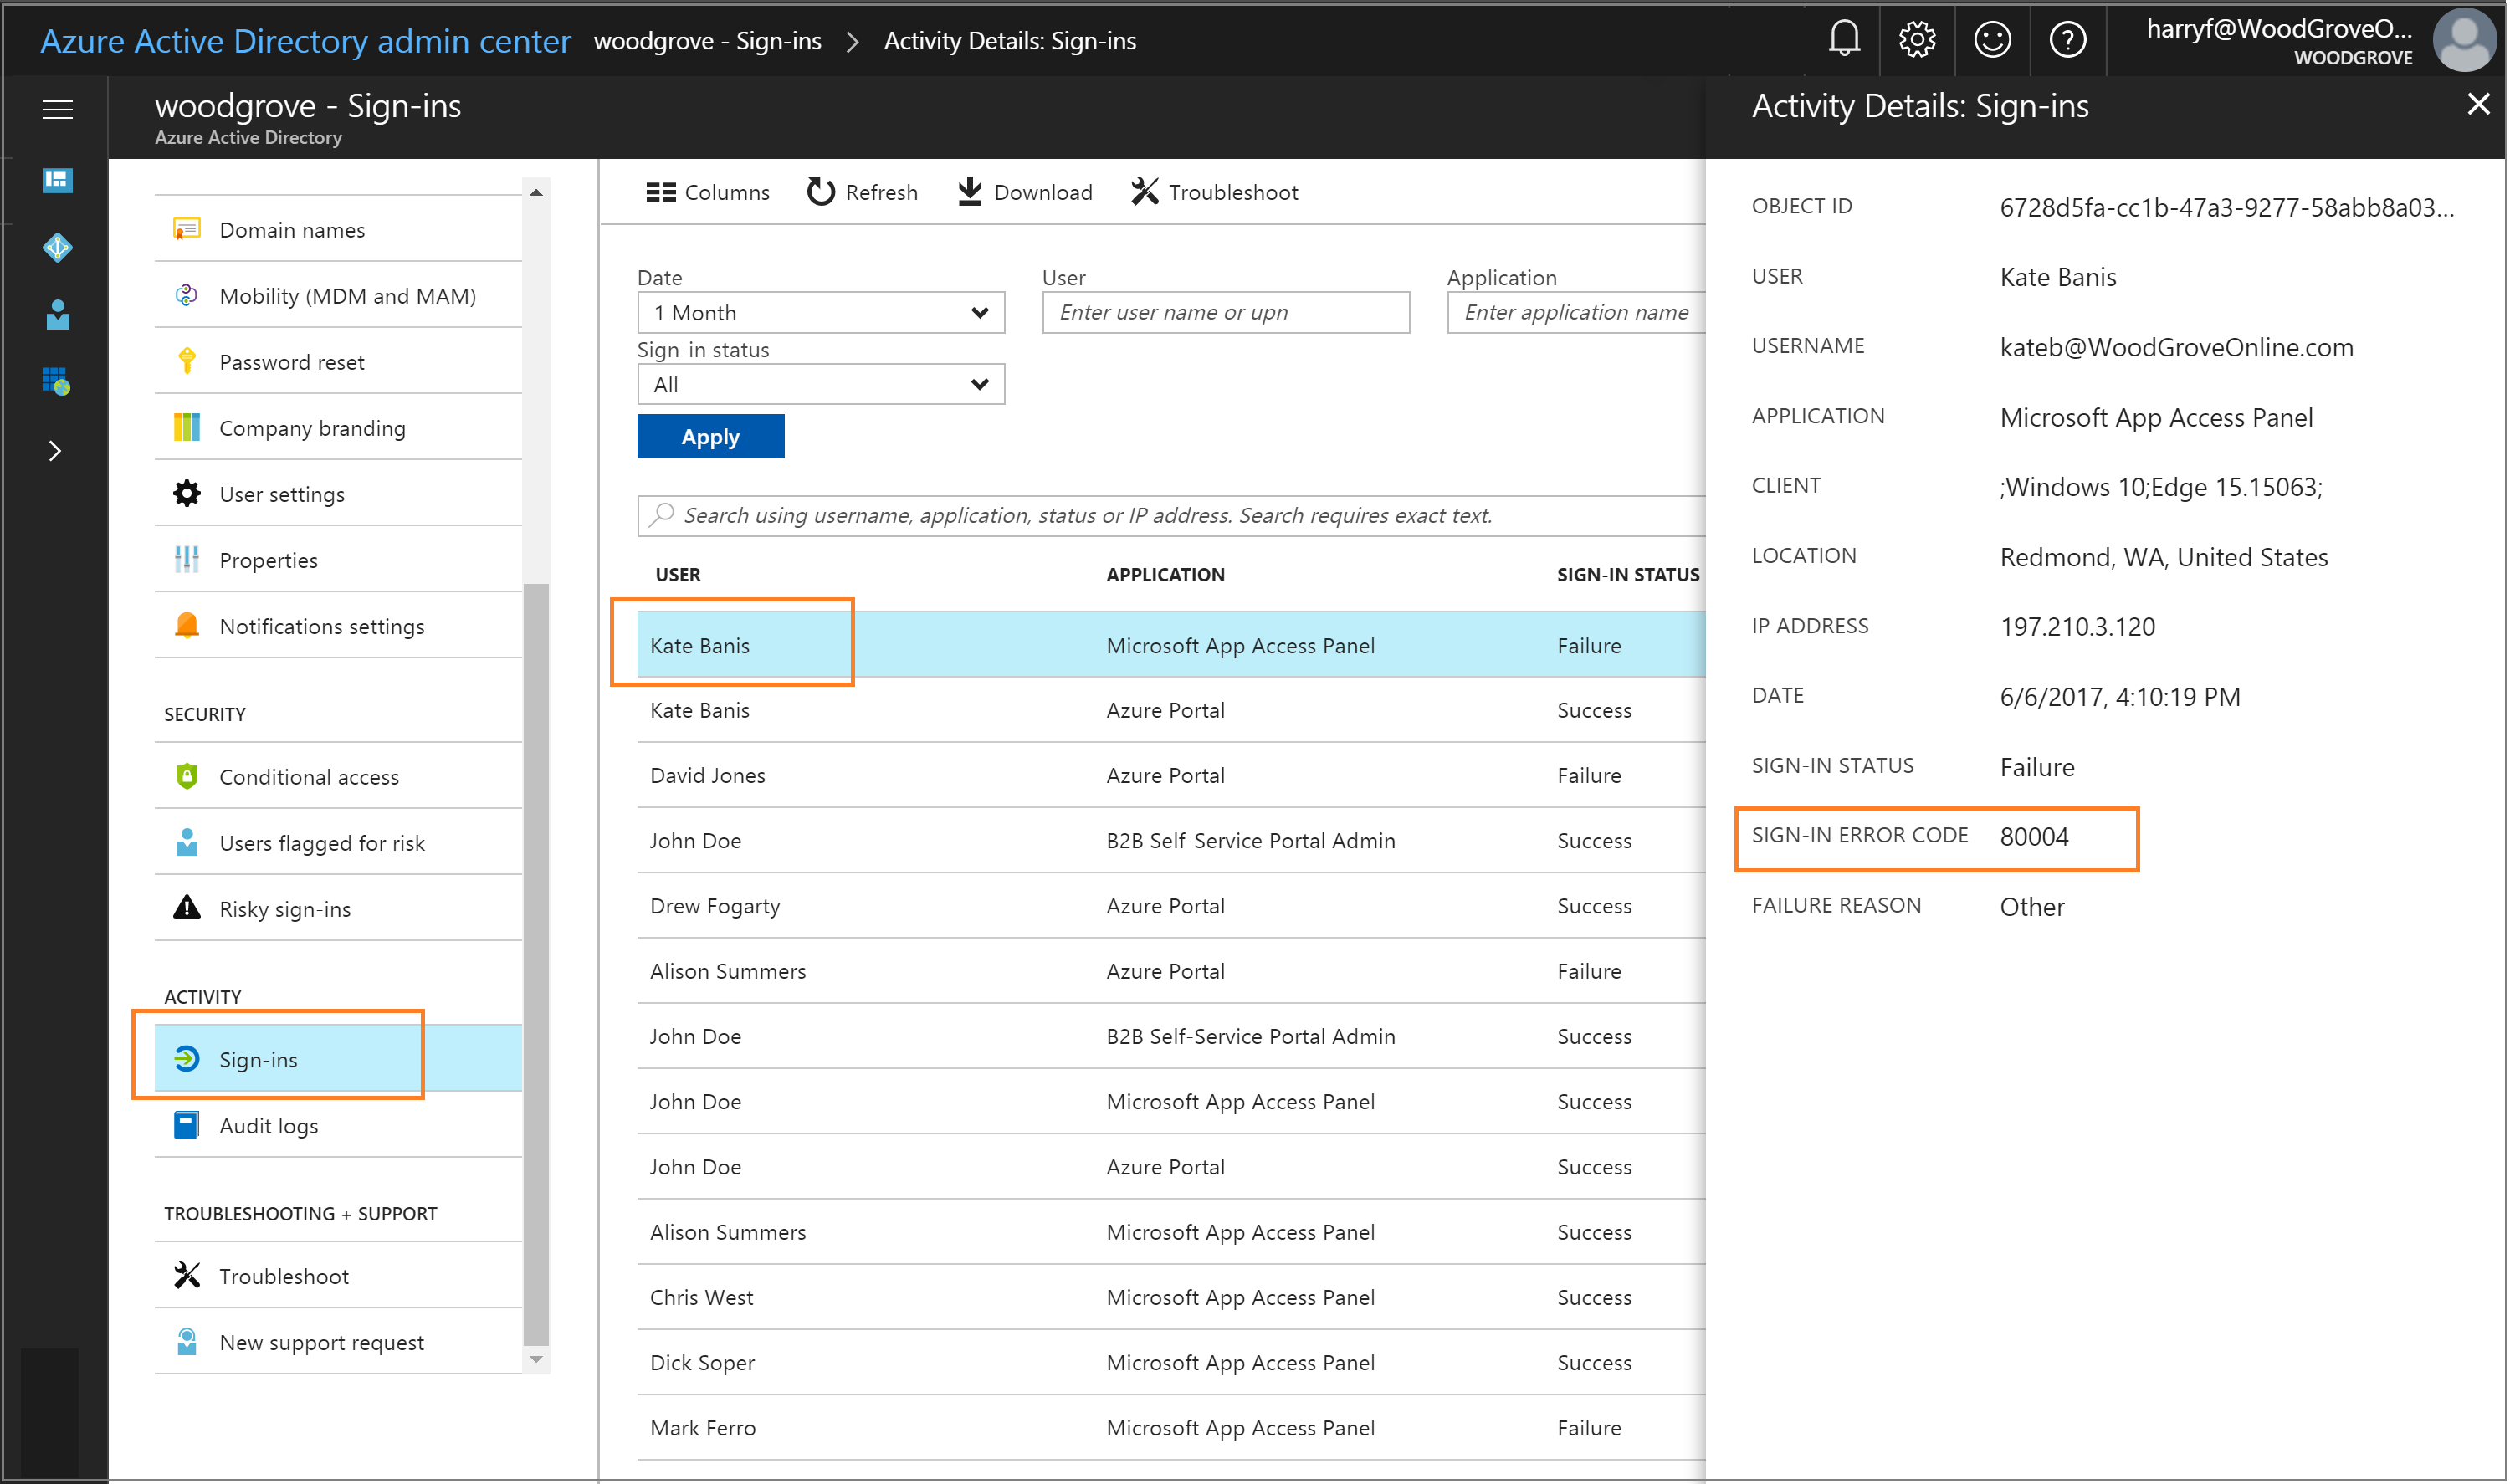 Azure Active Directory admin center - Sign-ins report